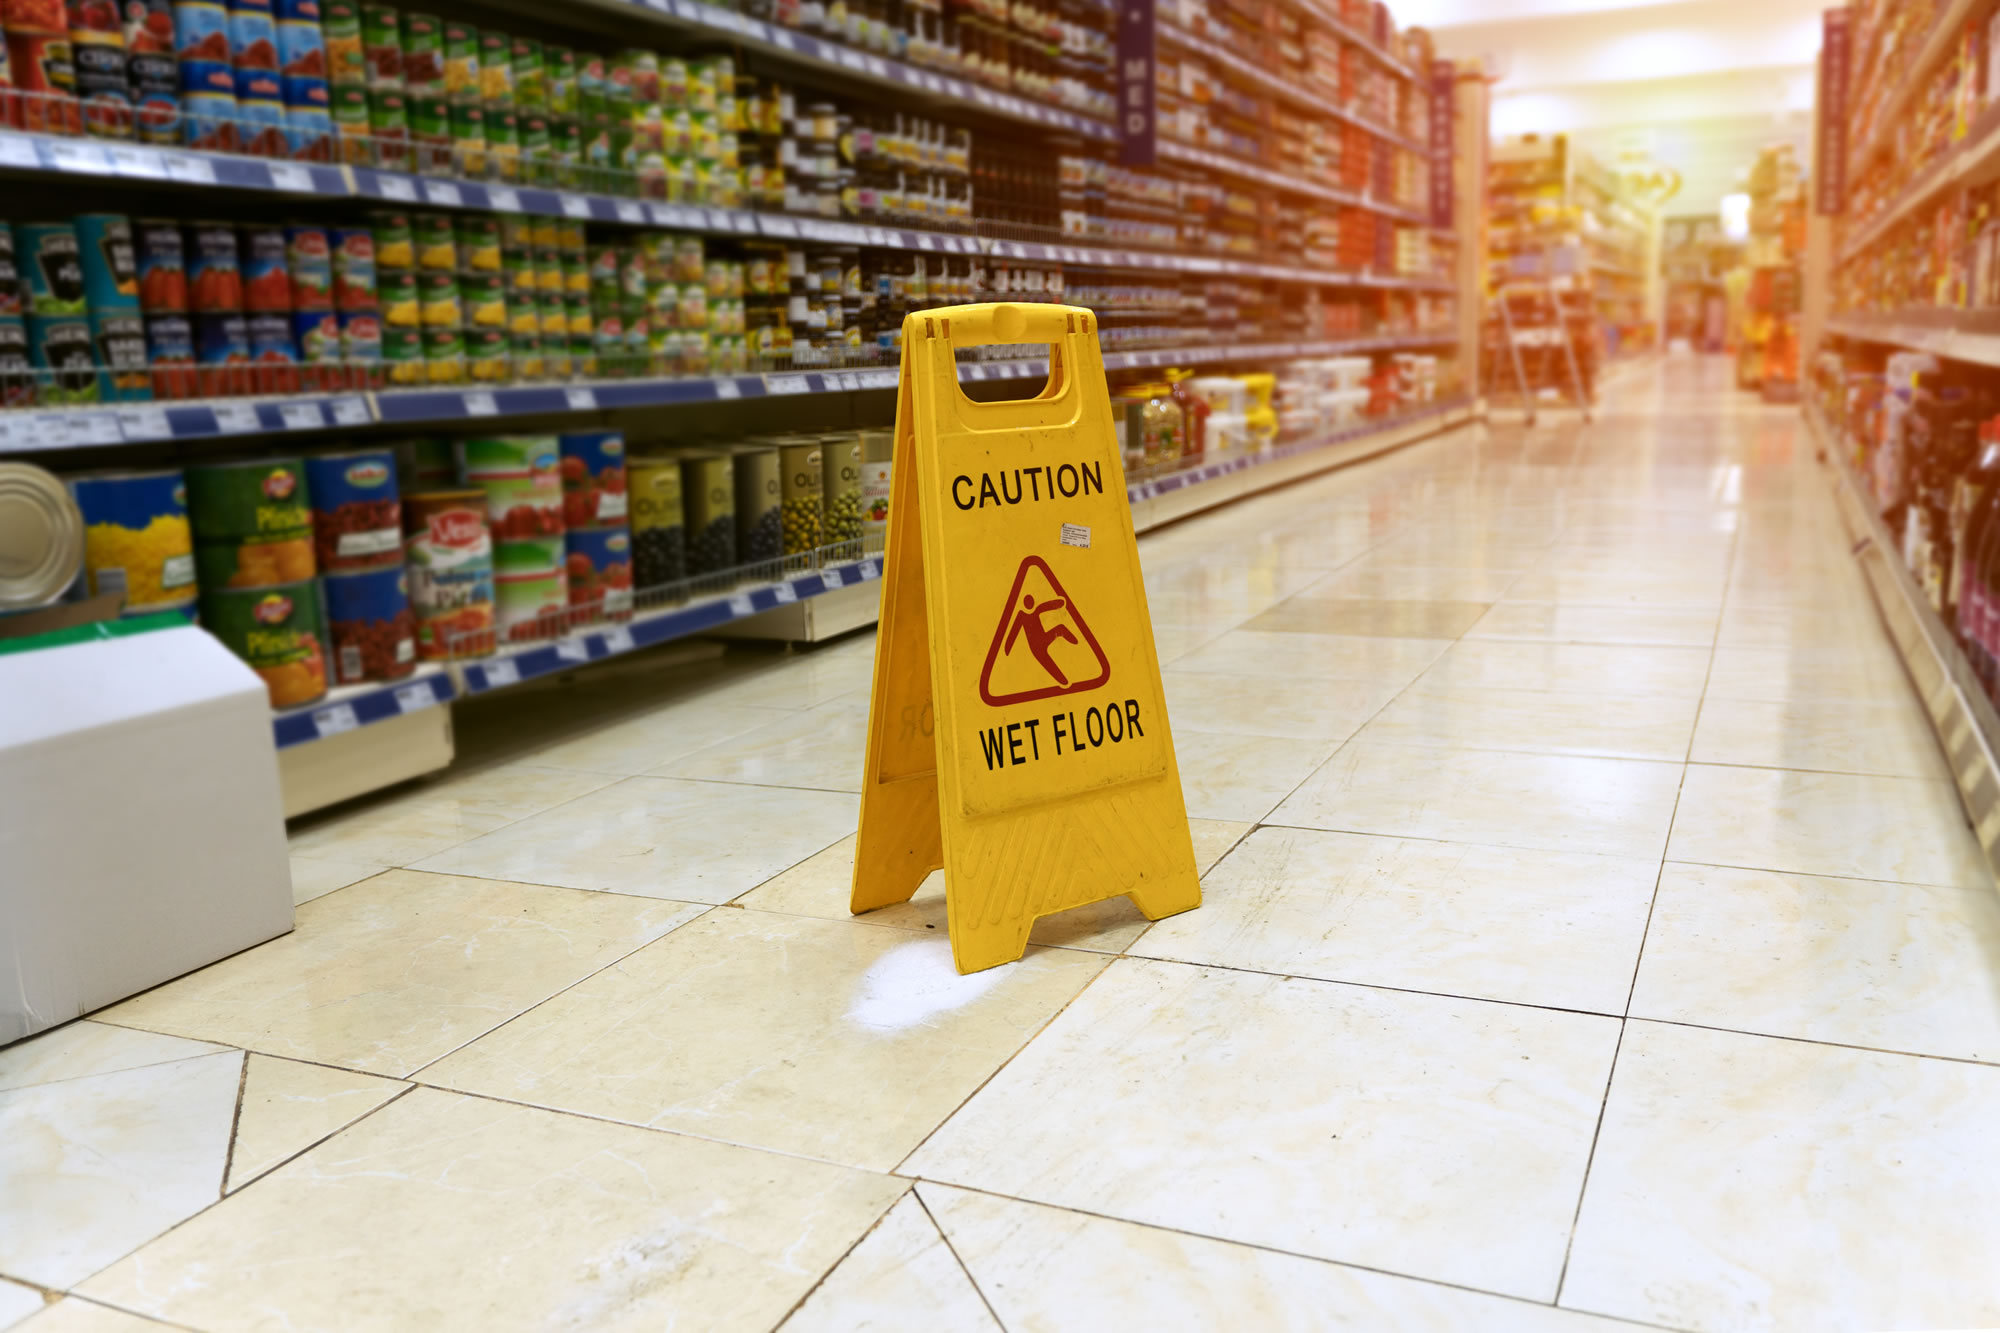 Slips, Trips & Falls Portsmouth - public liability, public places injury - in supermarkets, shops and shopping centres